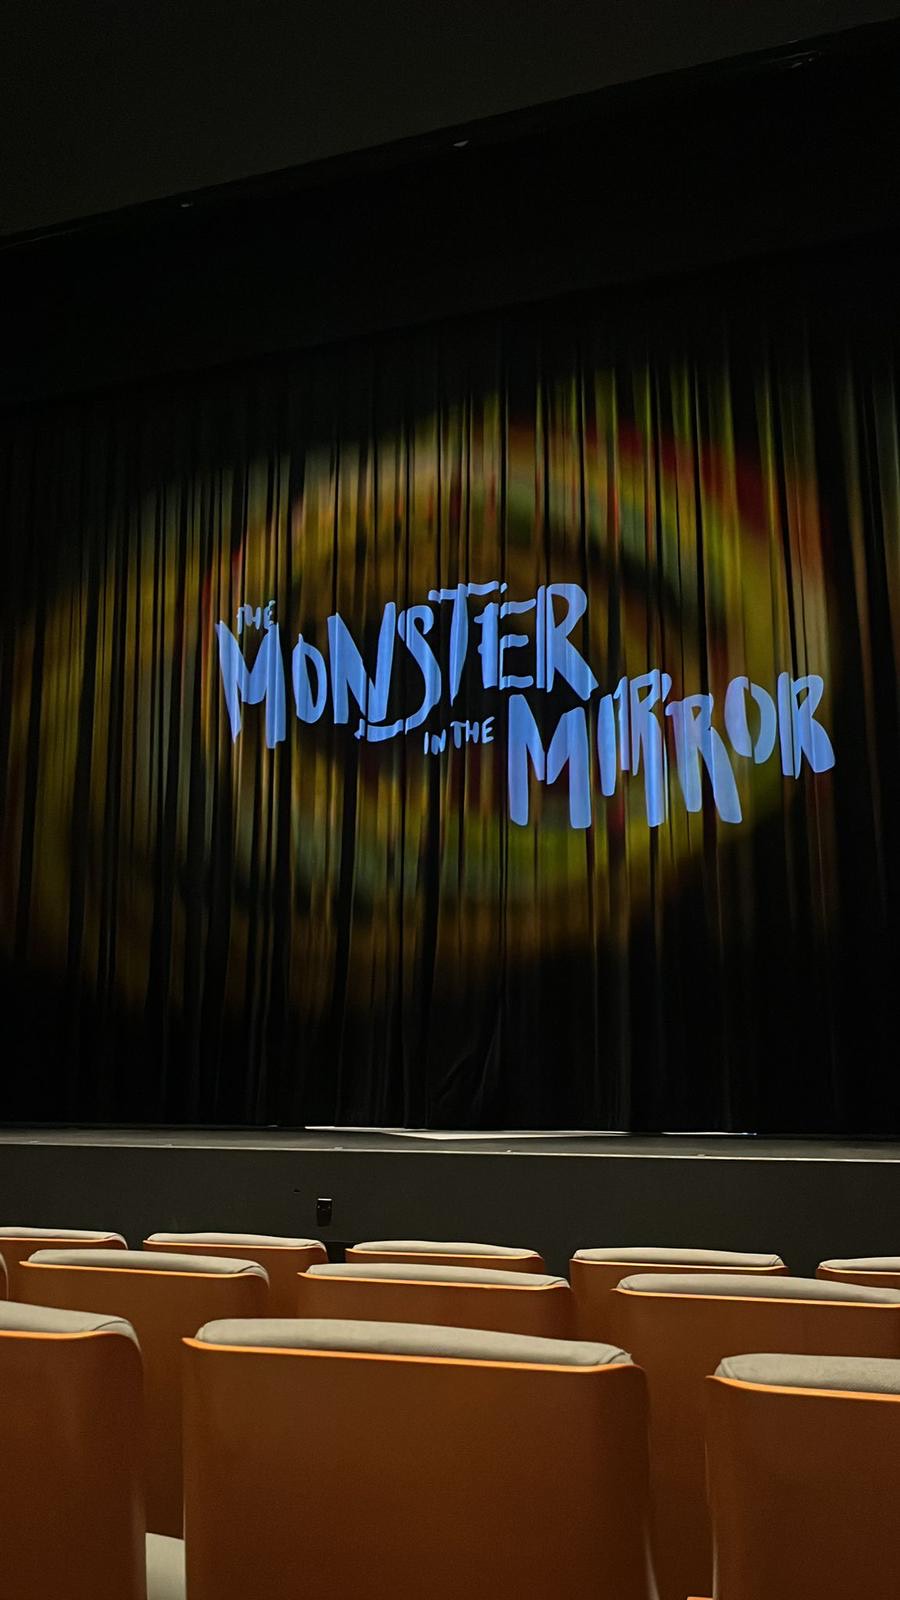 The Monster in the Mirror: A Musical that Reflects an Important Message